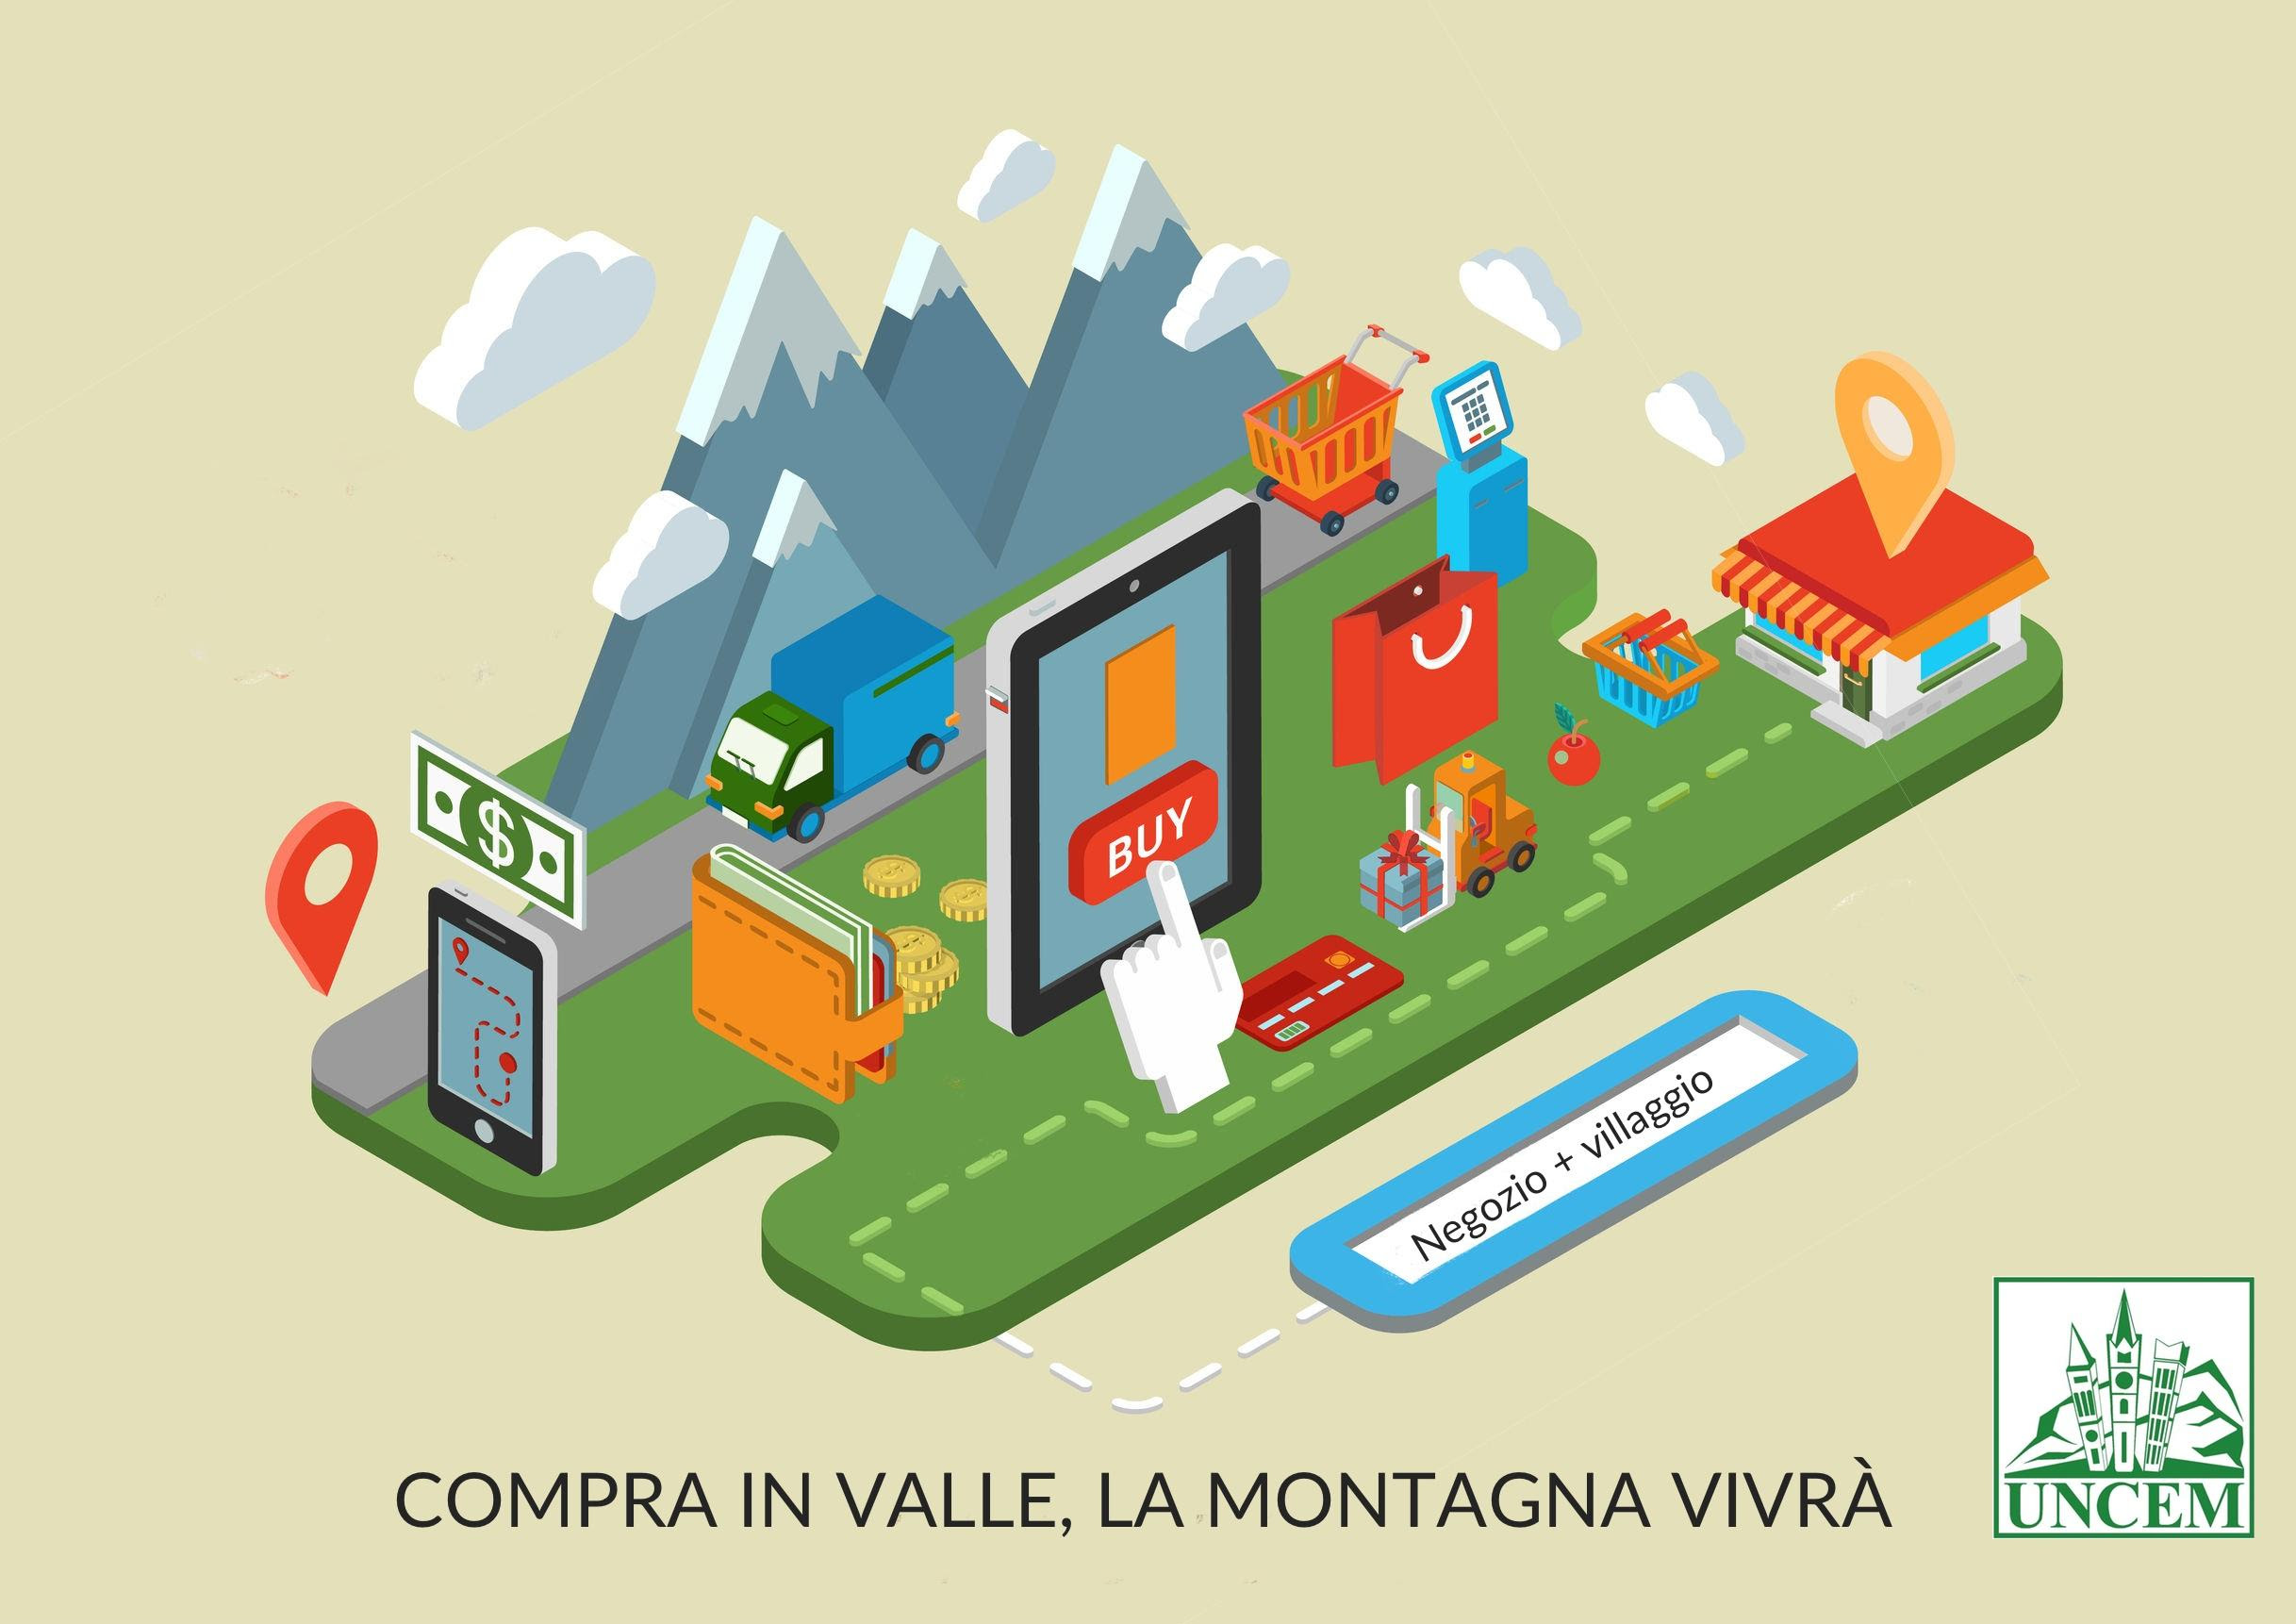 Compra in valle